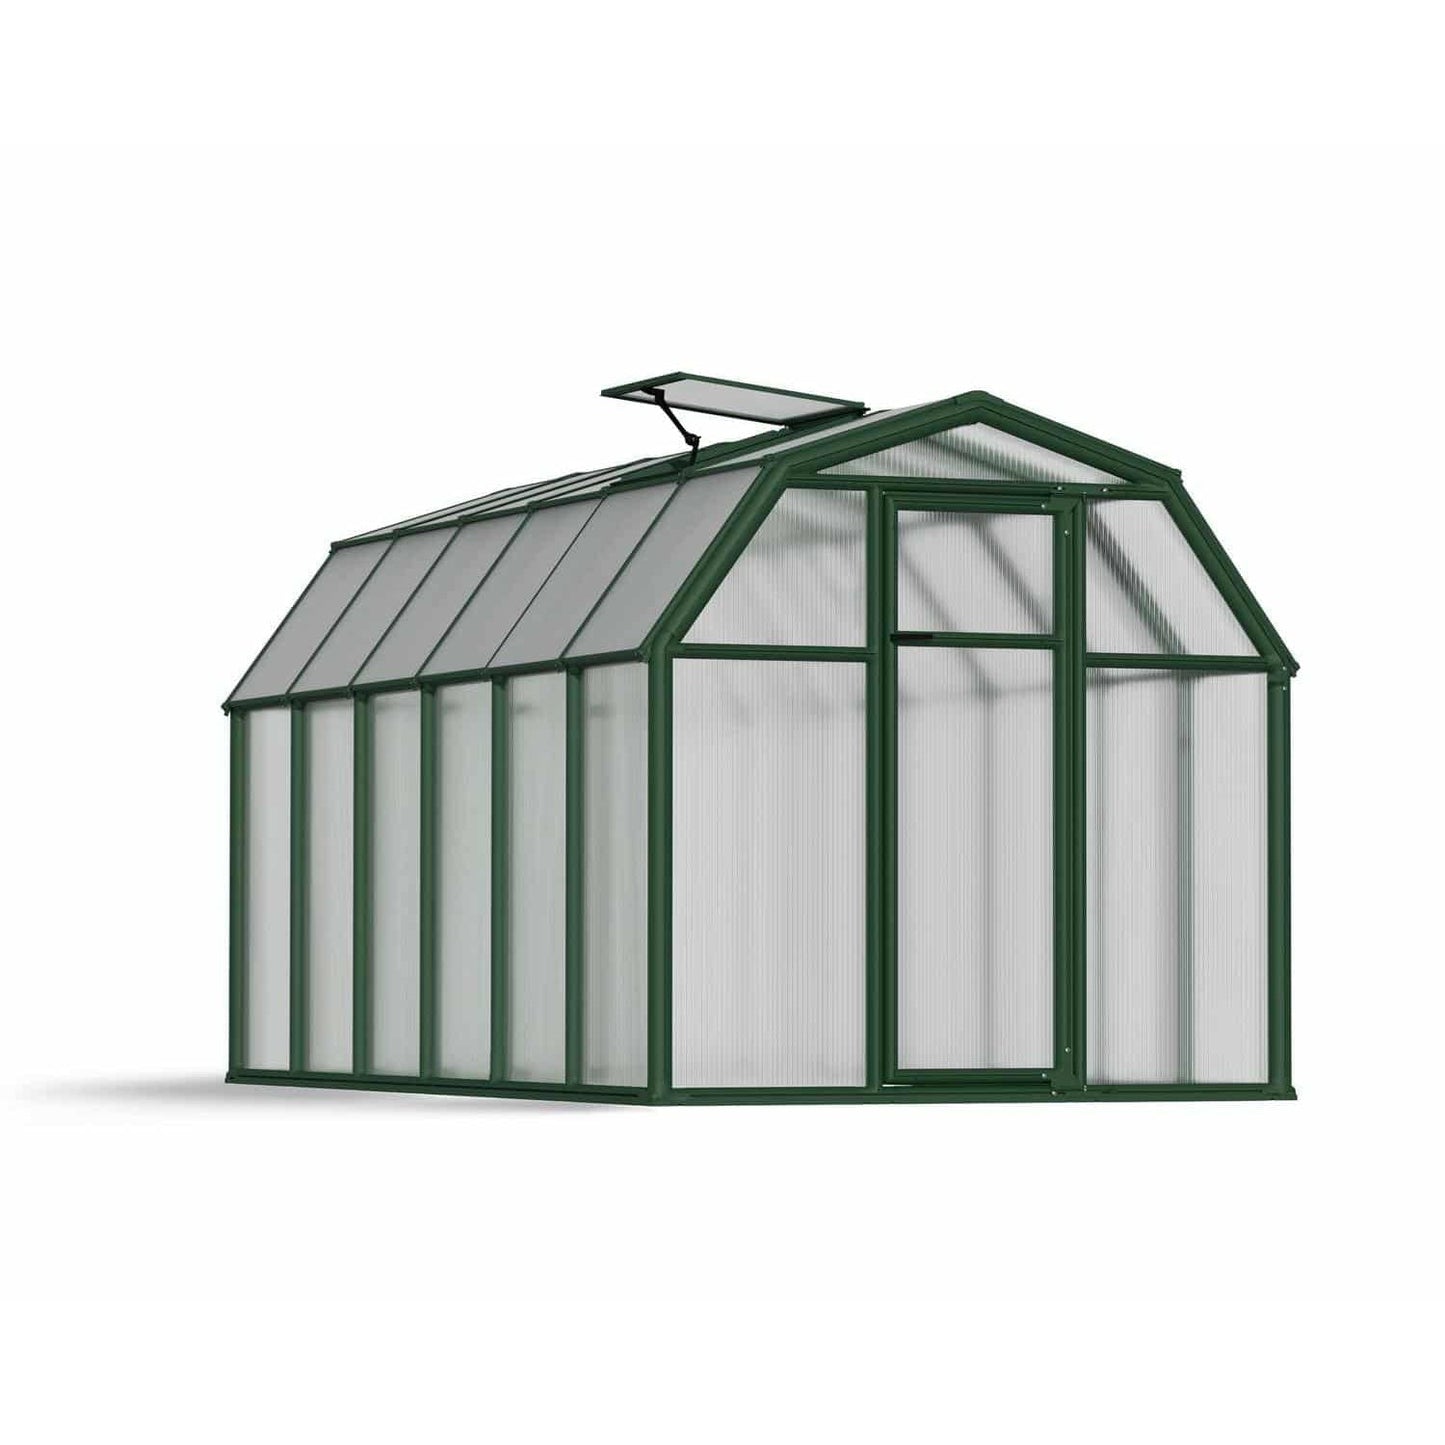 Rion EcoGrow Greenhouse 6 x 12 ft. - Delightful Yard